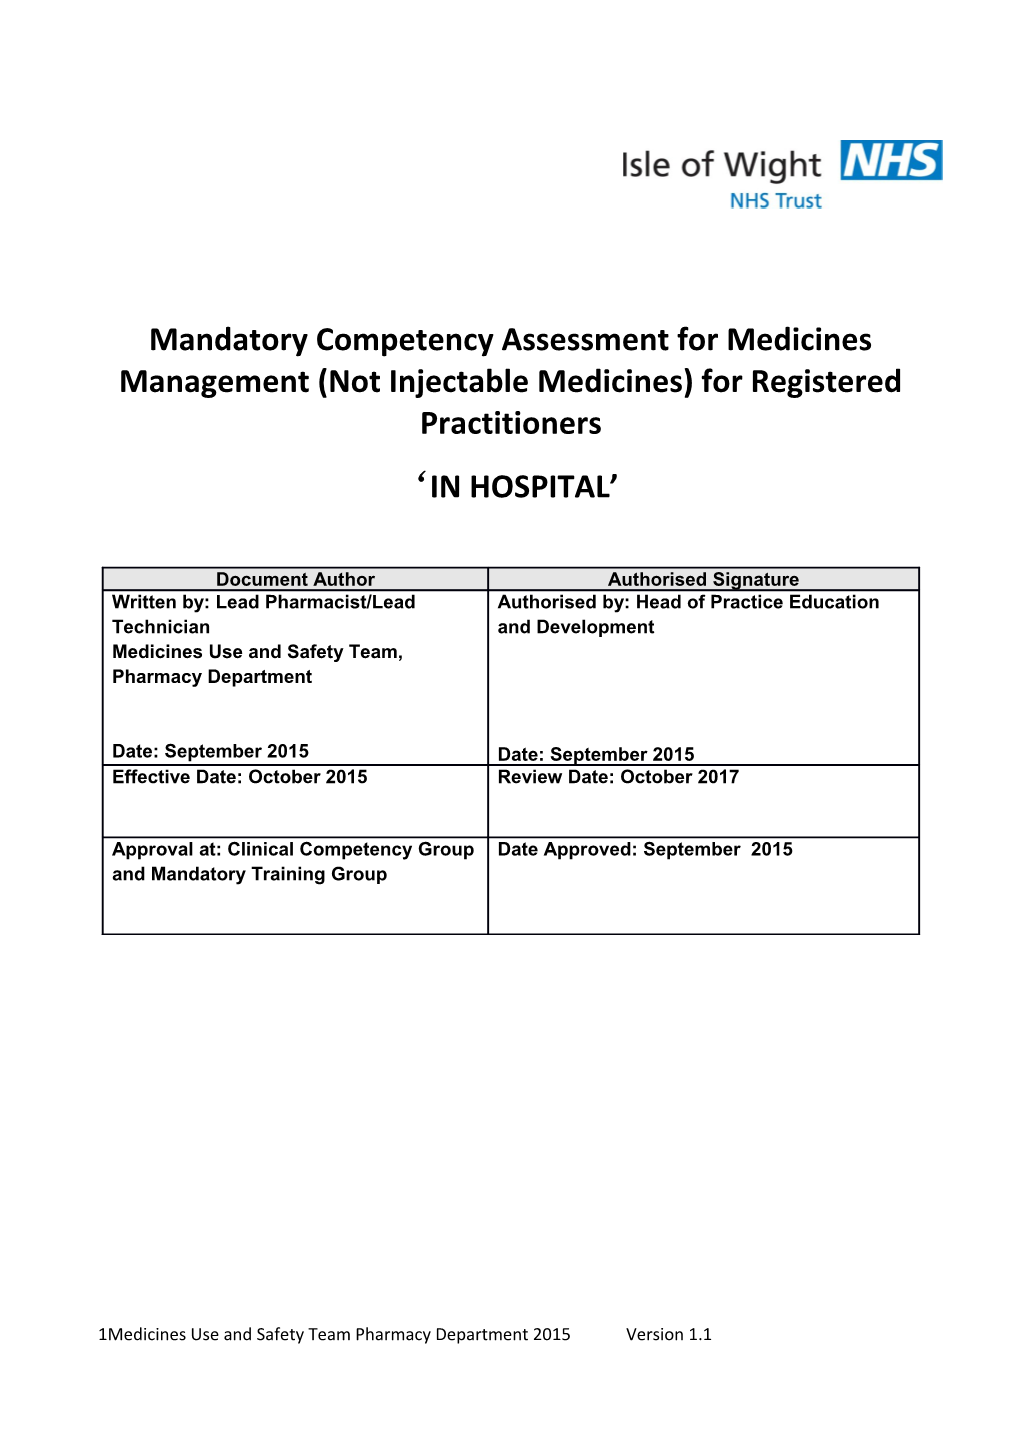 Mandatory Competency Assessment for Medicines Management (Not Injectable Medicines) For